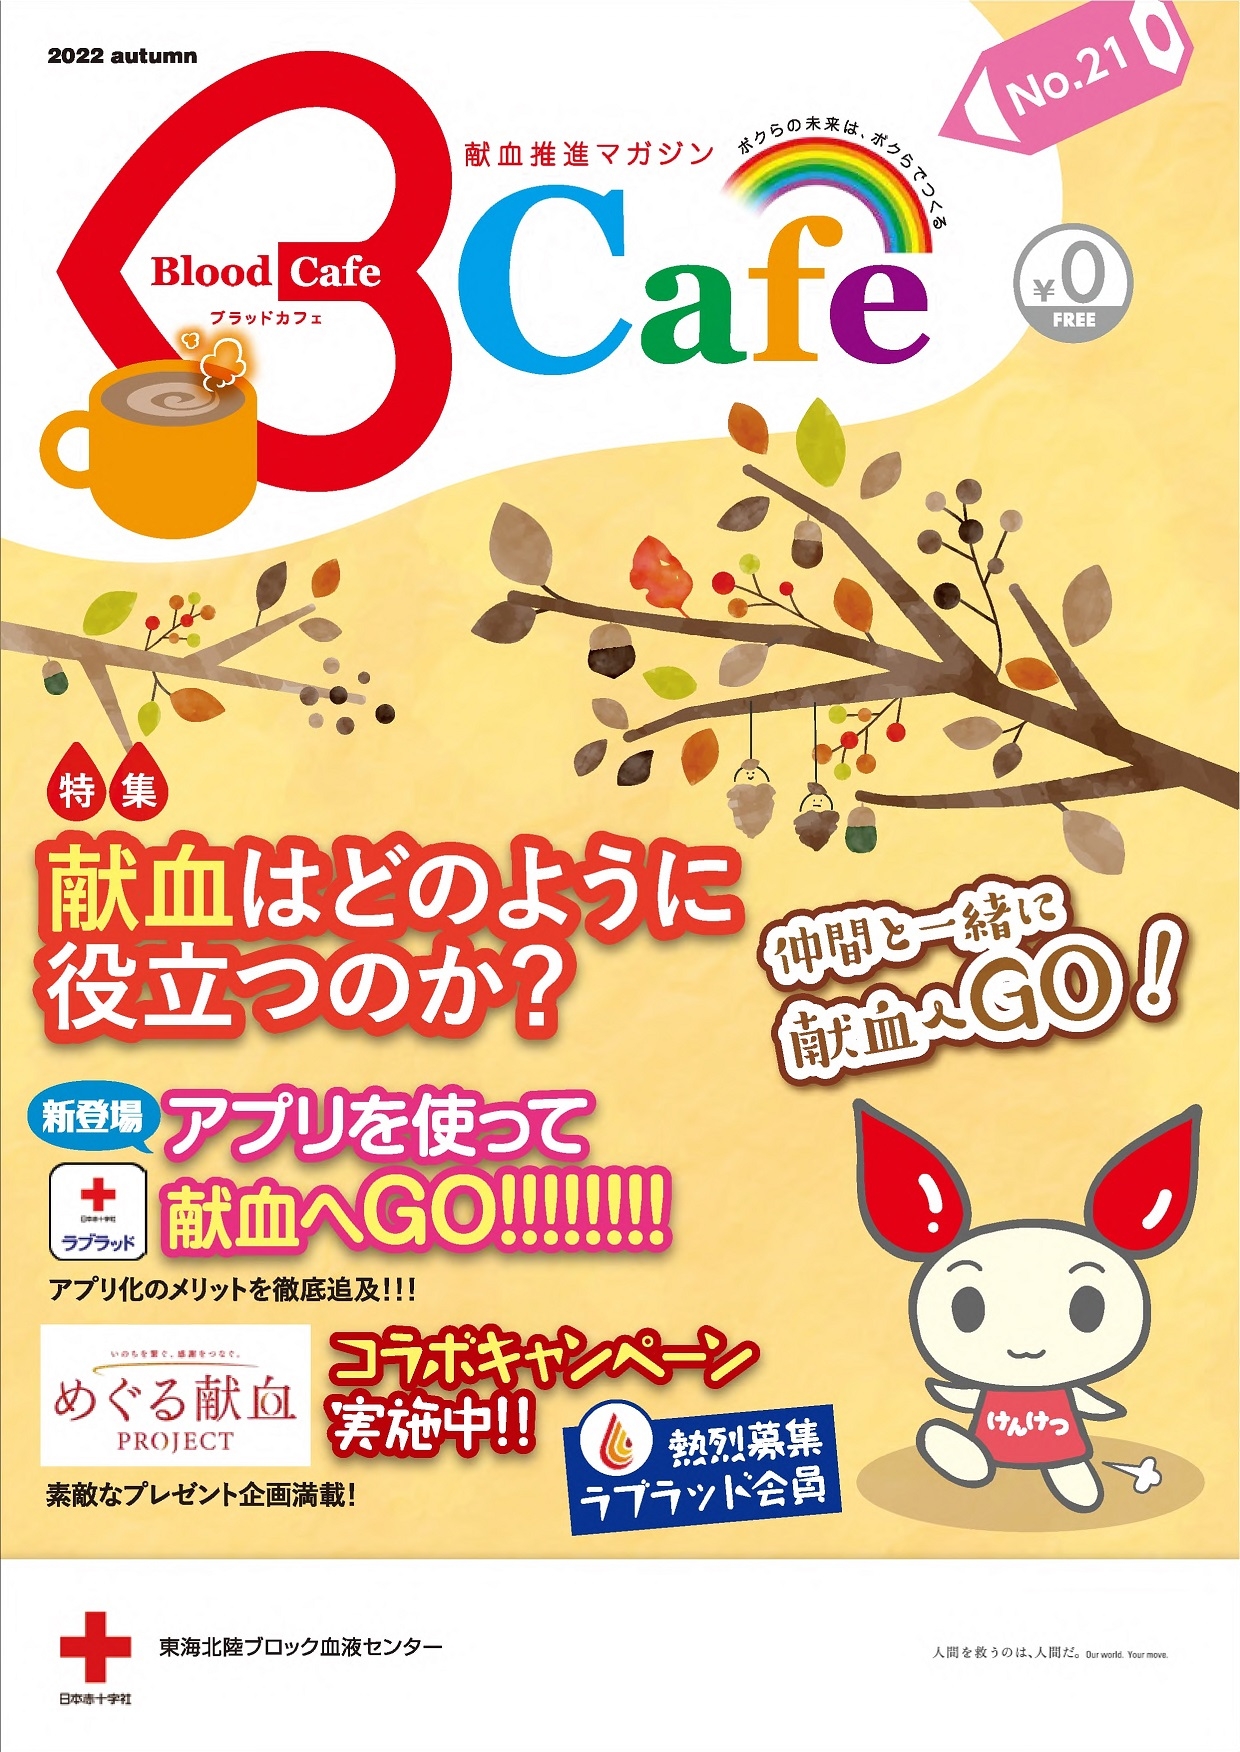 Blood Cafe 第21号のサムネイル